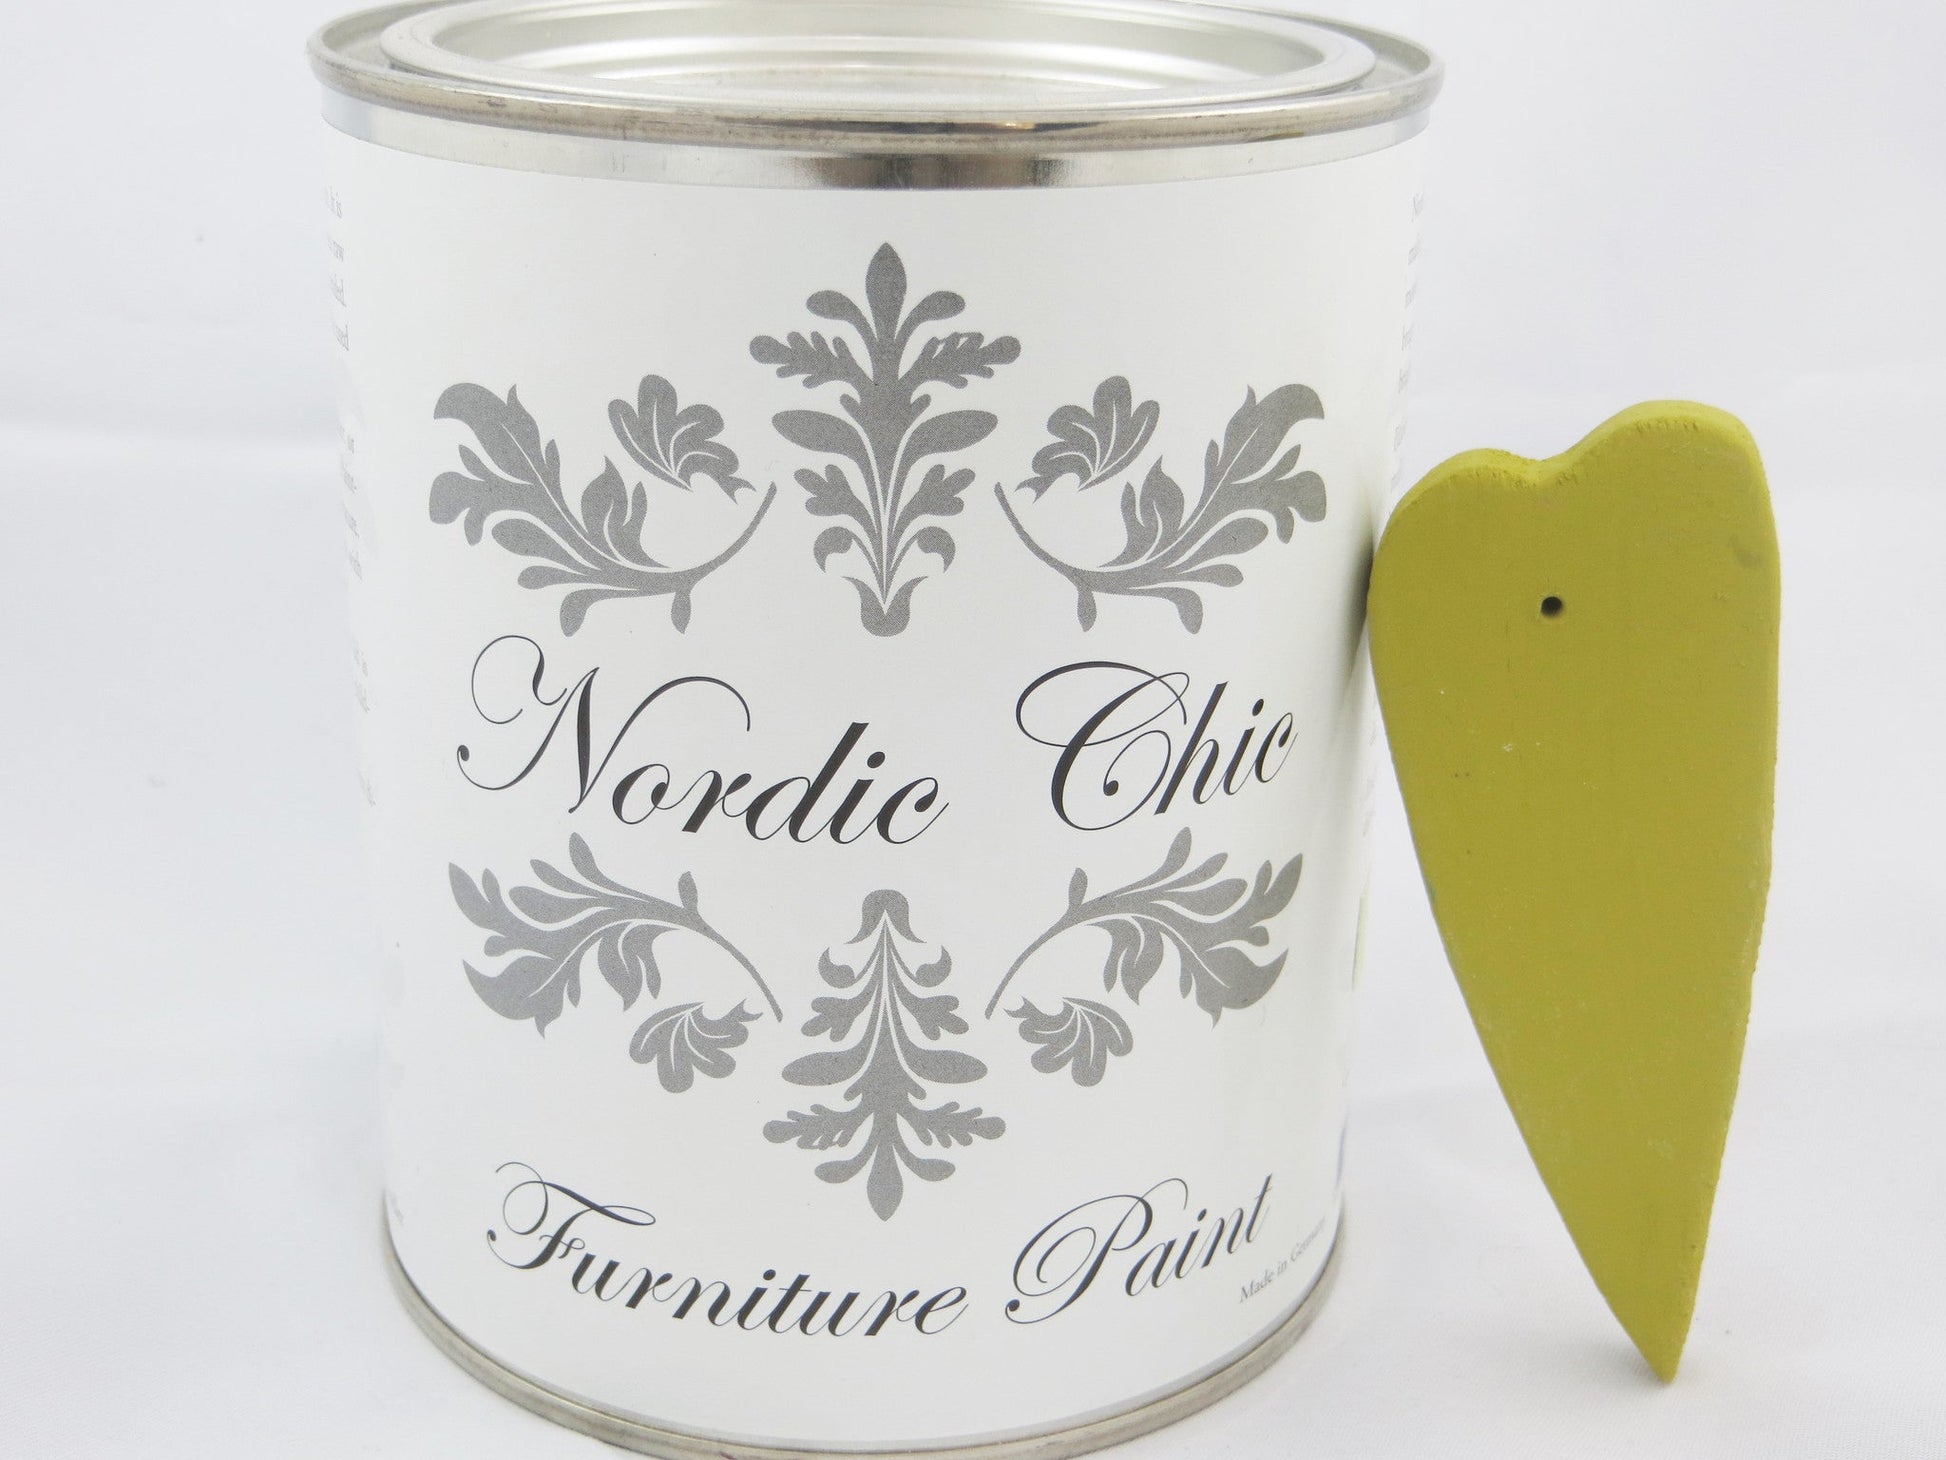 Nordic Chic Furniture Paint - Olive - Nordic Chic®